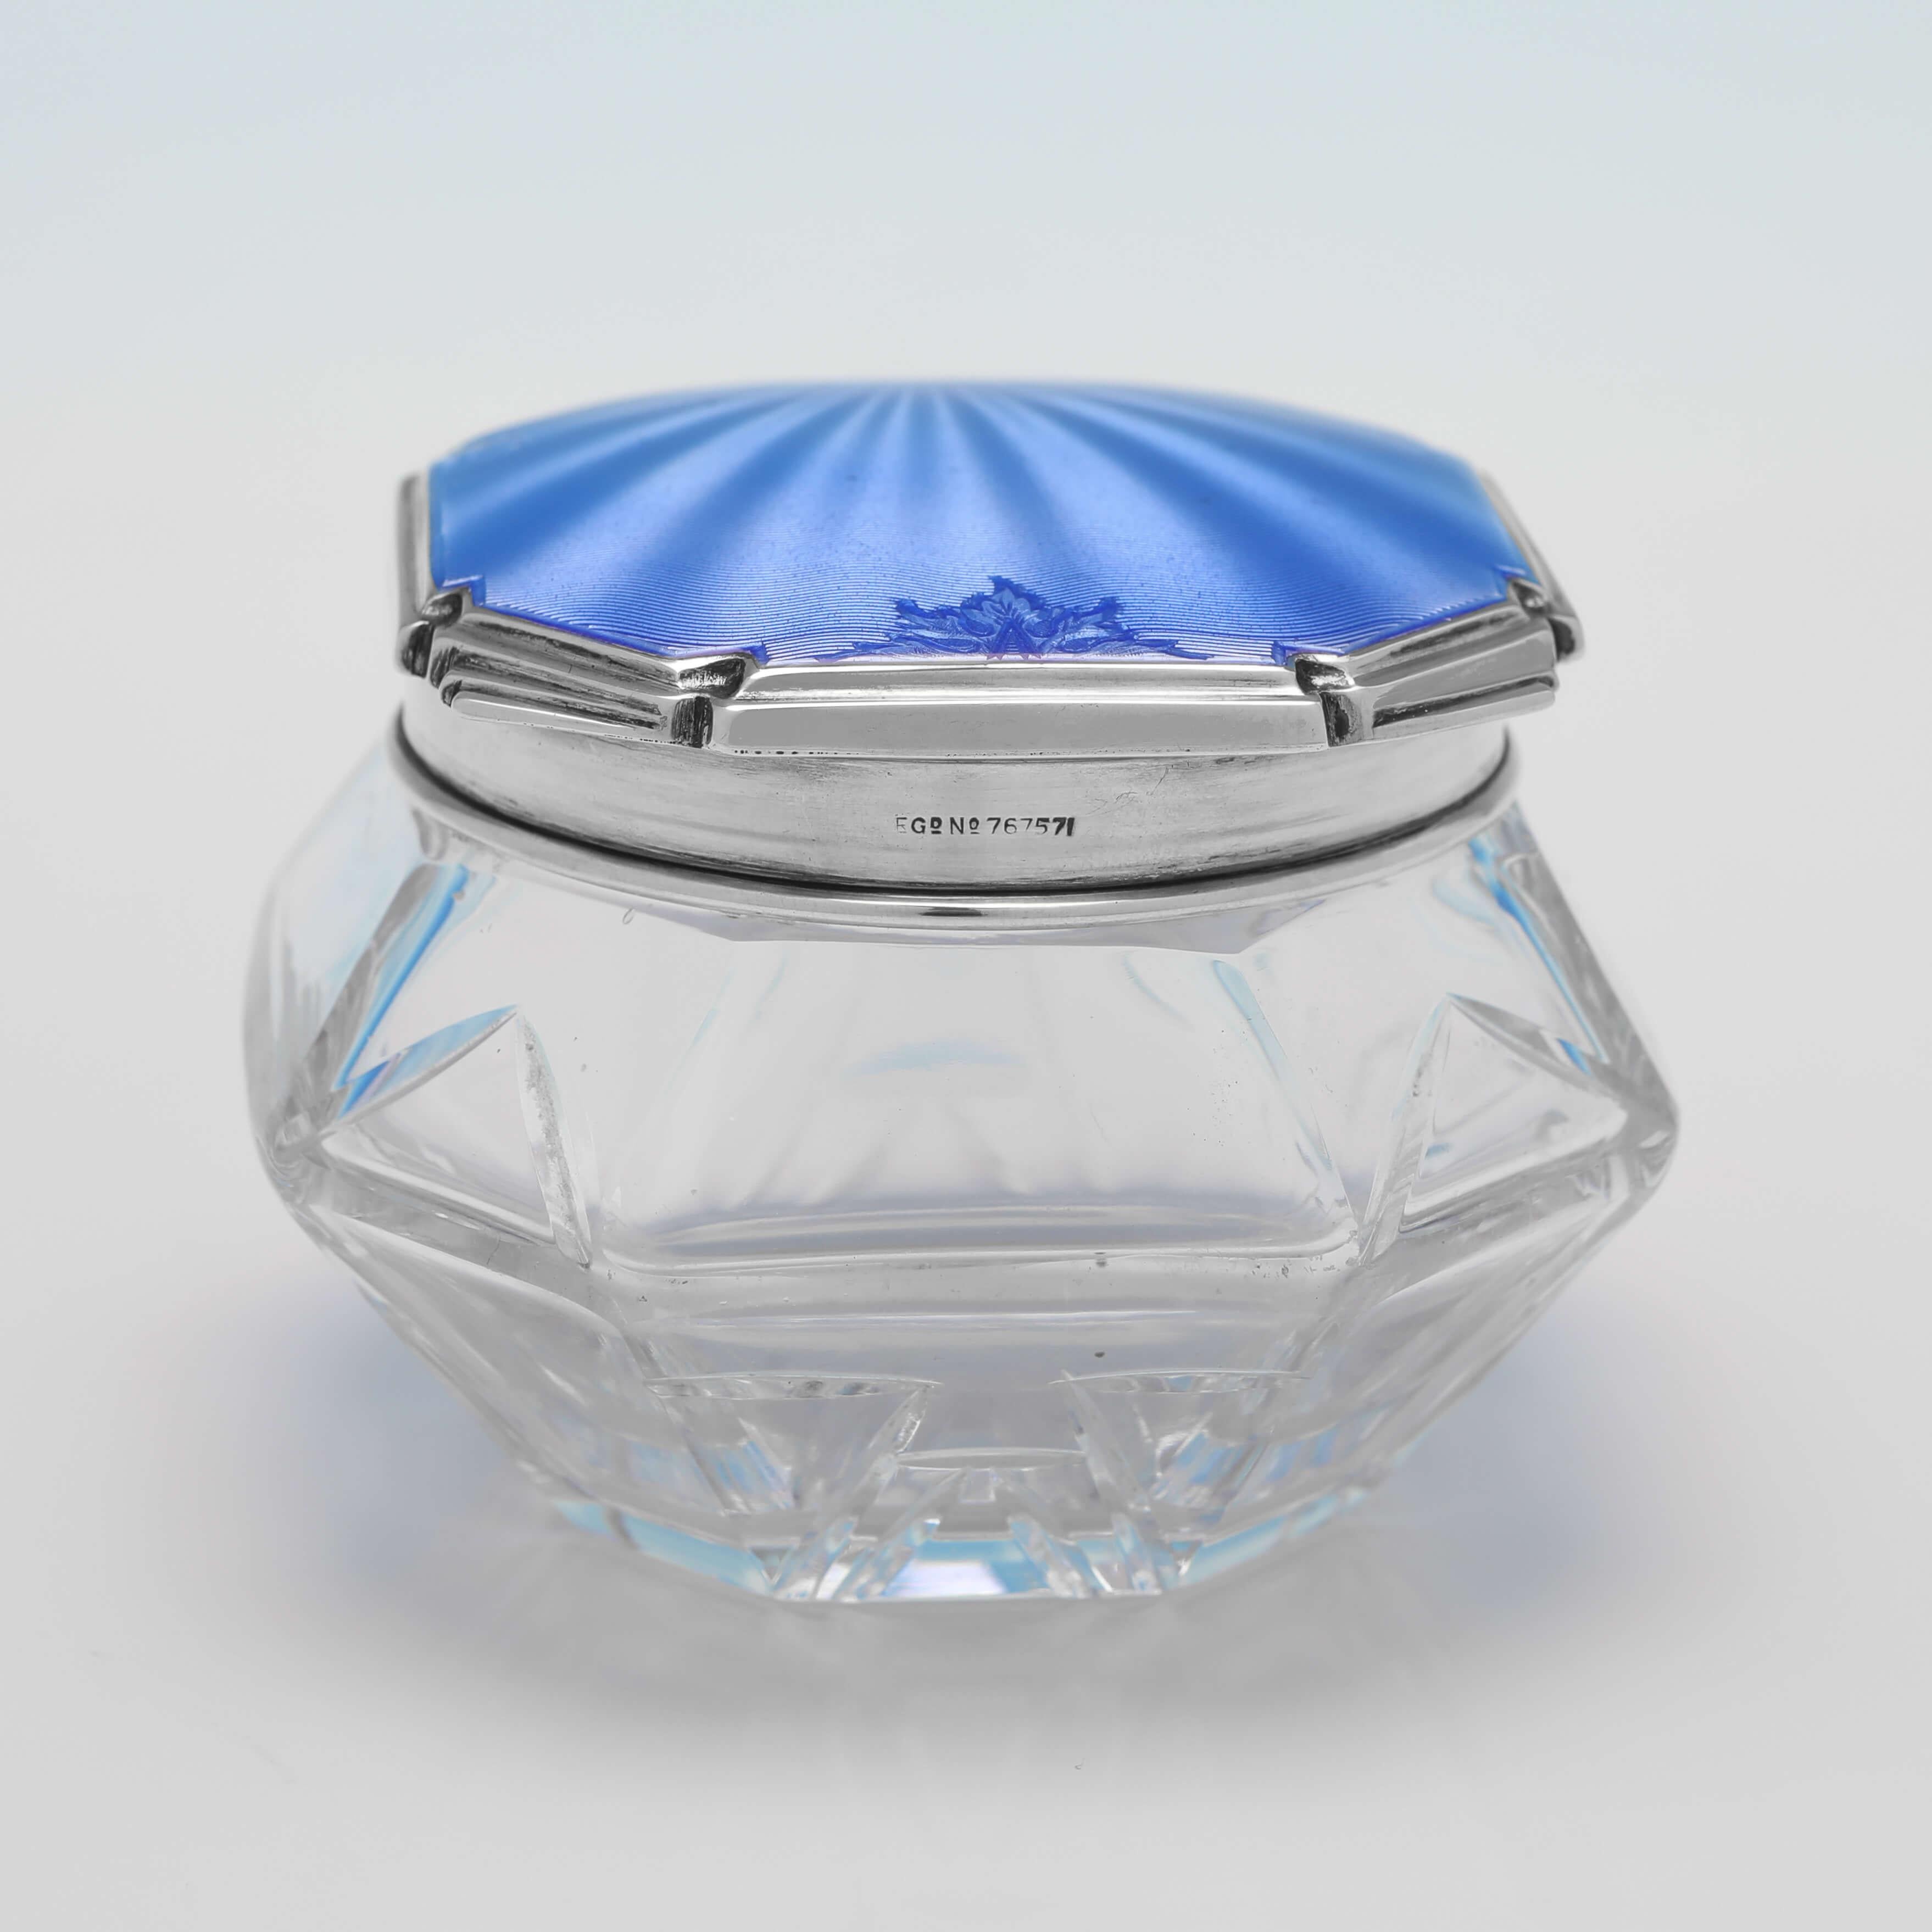 Hallmarked in Sheffield in 1933 by Walker & Hall, this stunning, Glass & Sterling Silver Dressing Table Jar, features a very stylish Art Deco enamel lid, and an angular glass body. 

The dressing table jar measures 2.75